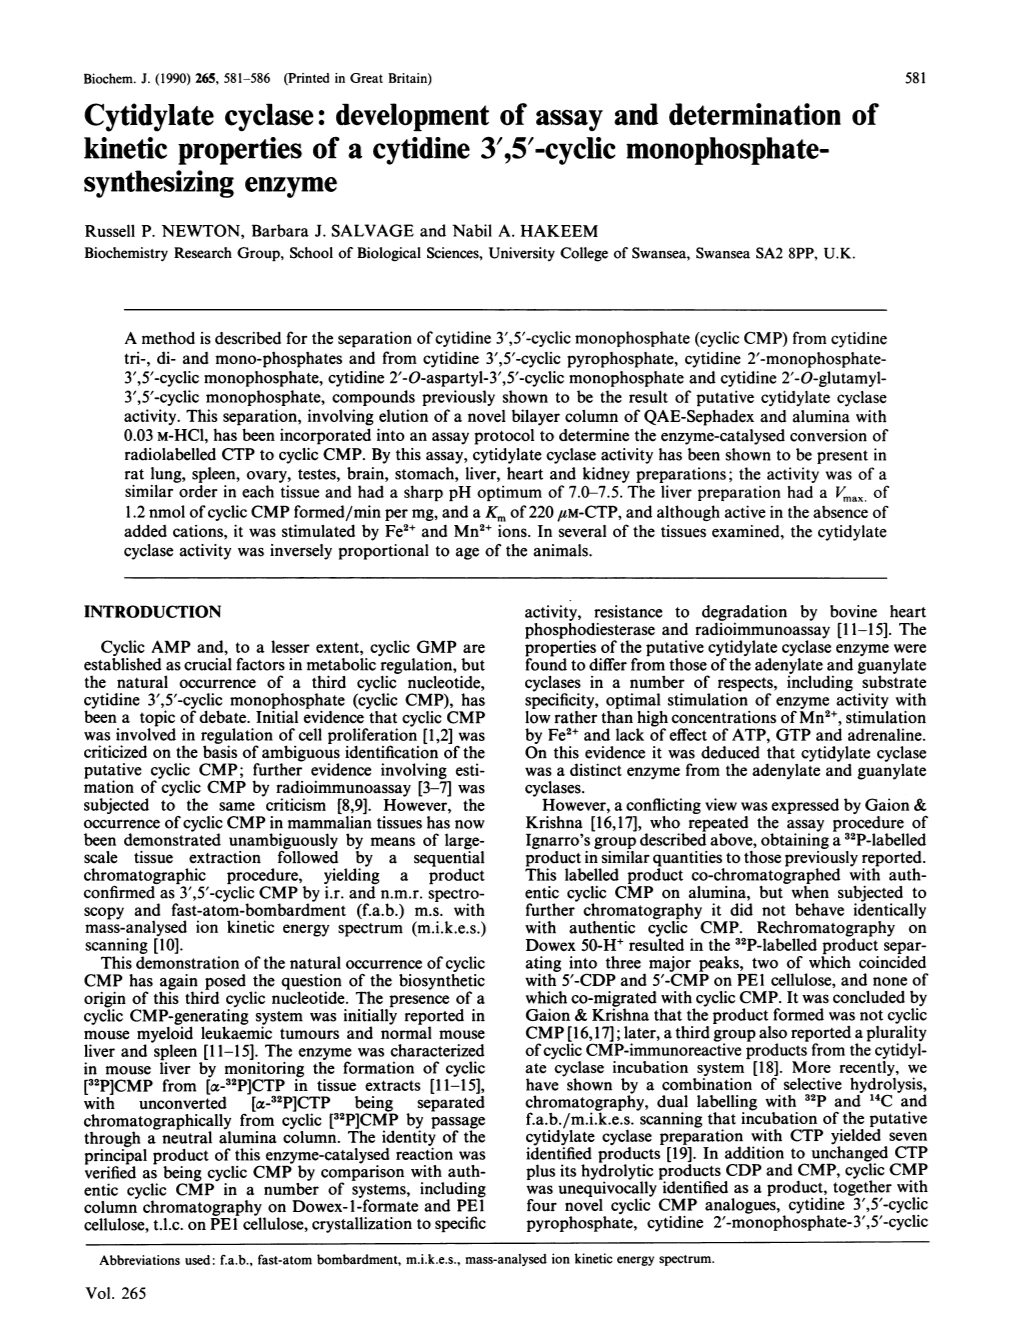 Cytidylate Cyclase: Development of Assay and Determination of Kinetic Properties of a Cytidine 3',5'-Cyclic Monophosphate- Synthesizing Enzyme